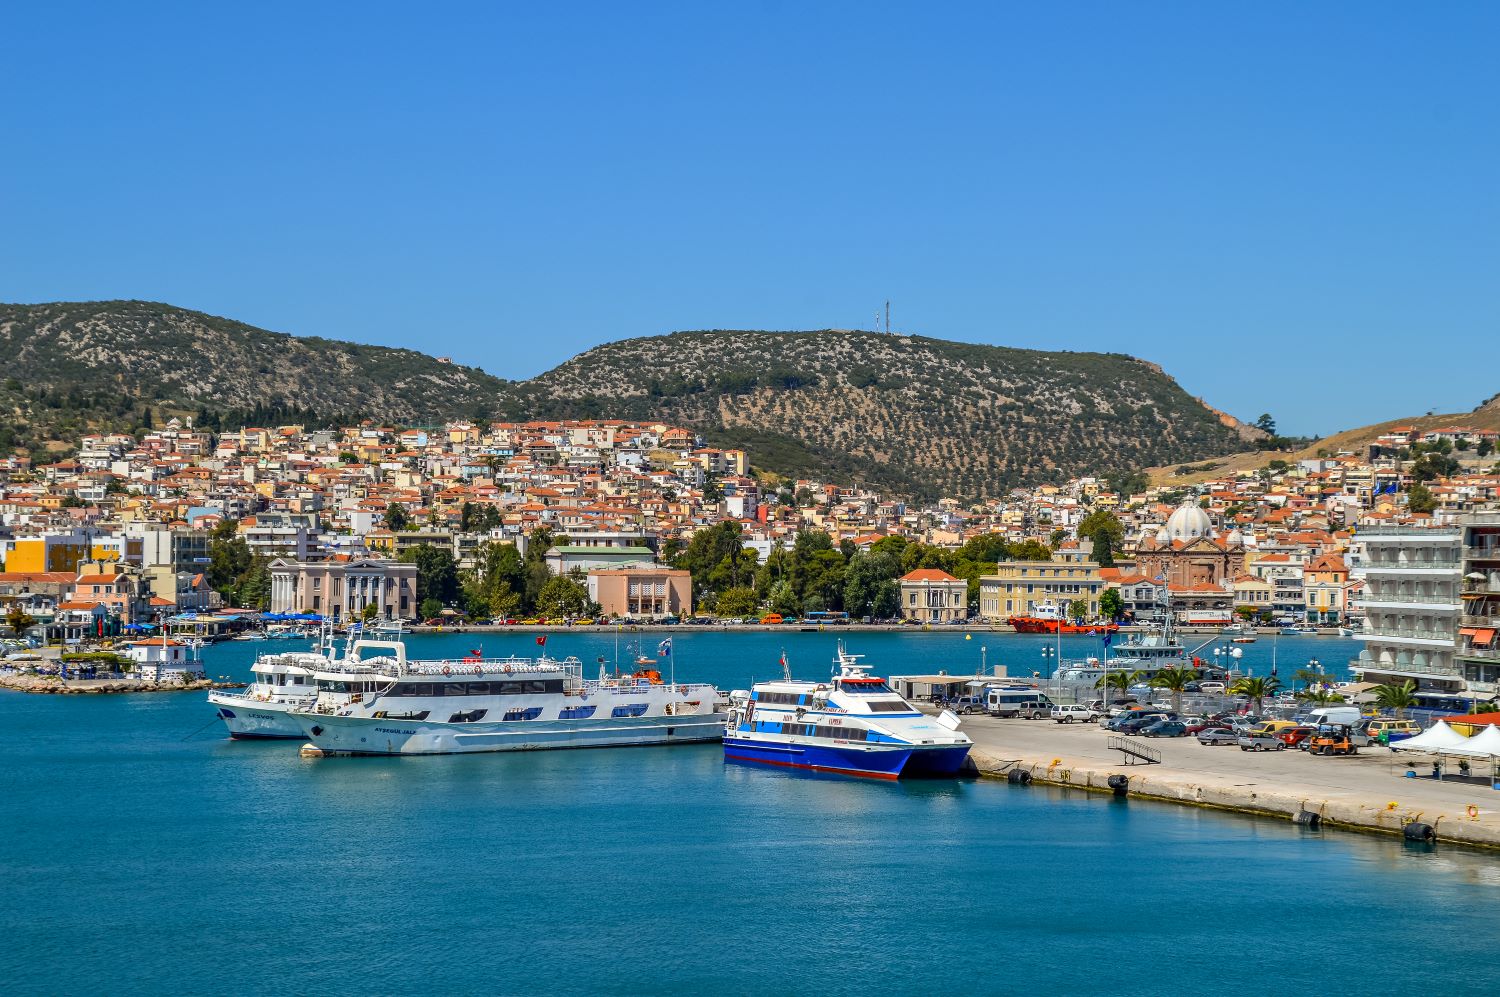 Top ten things to see and do in Mytilene